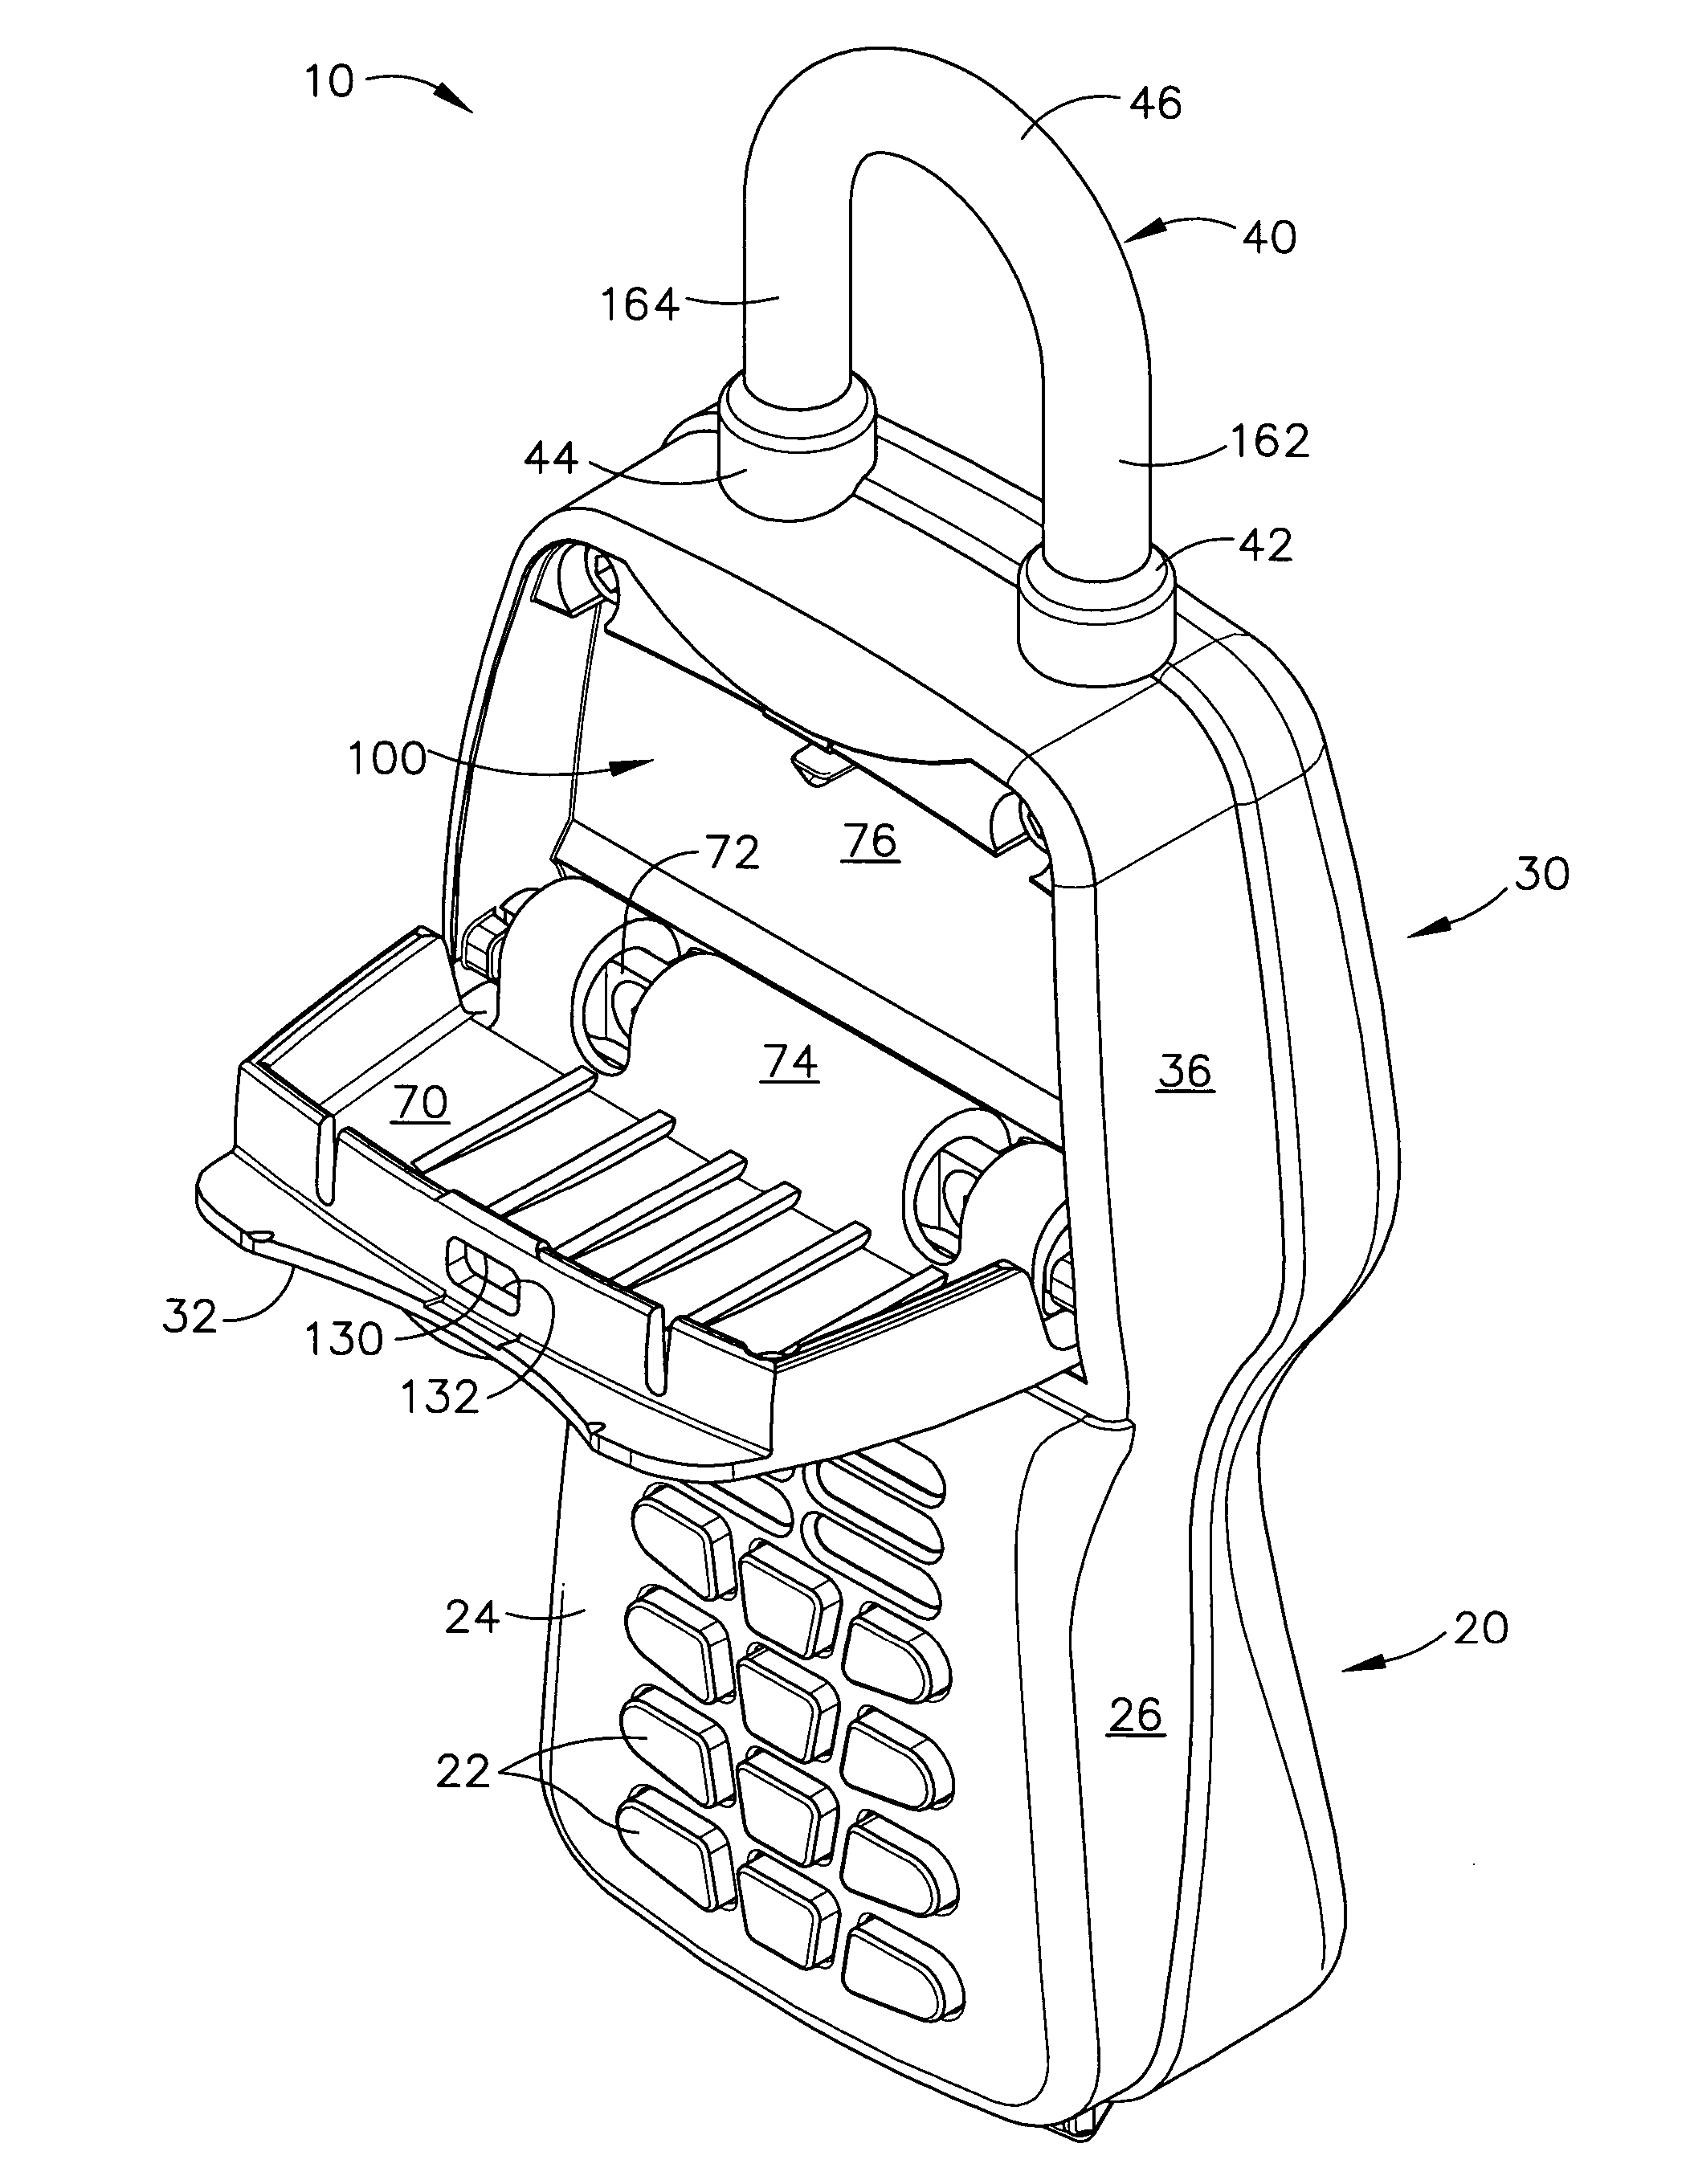 Electronic lock box with multiple modes and security states